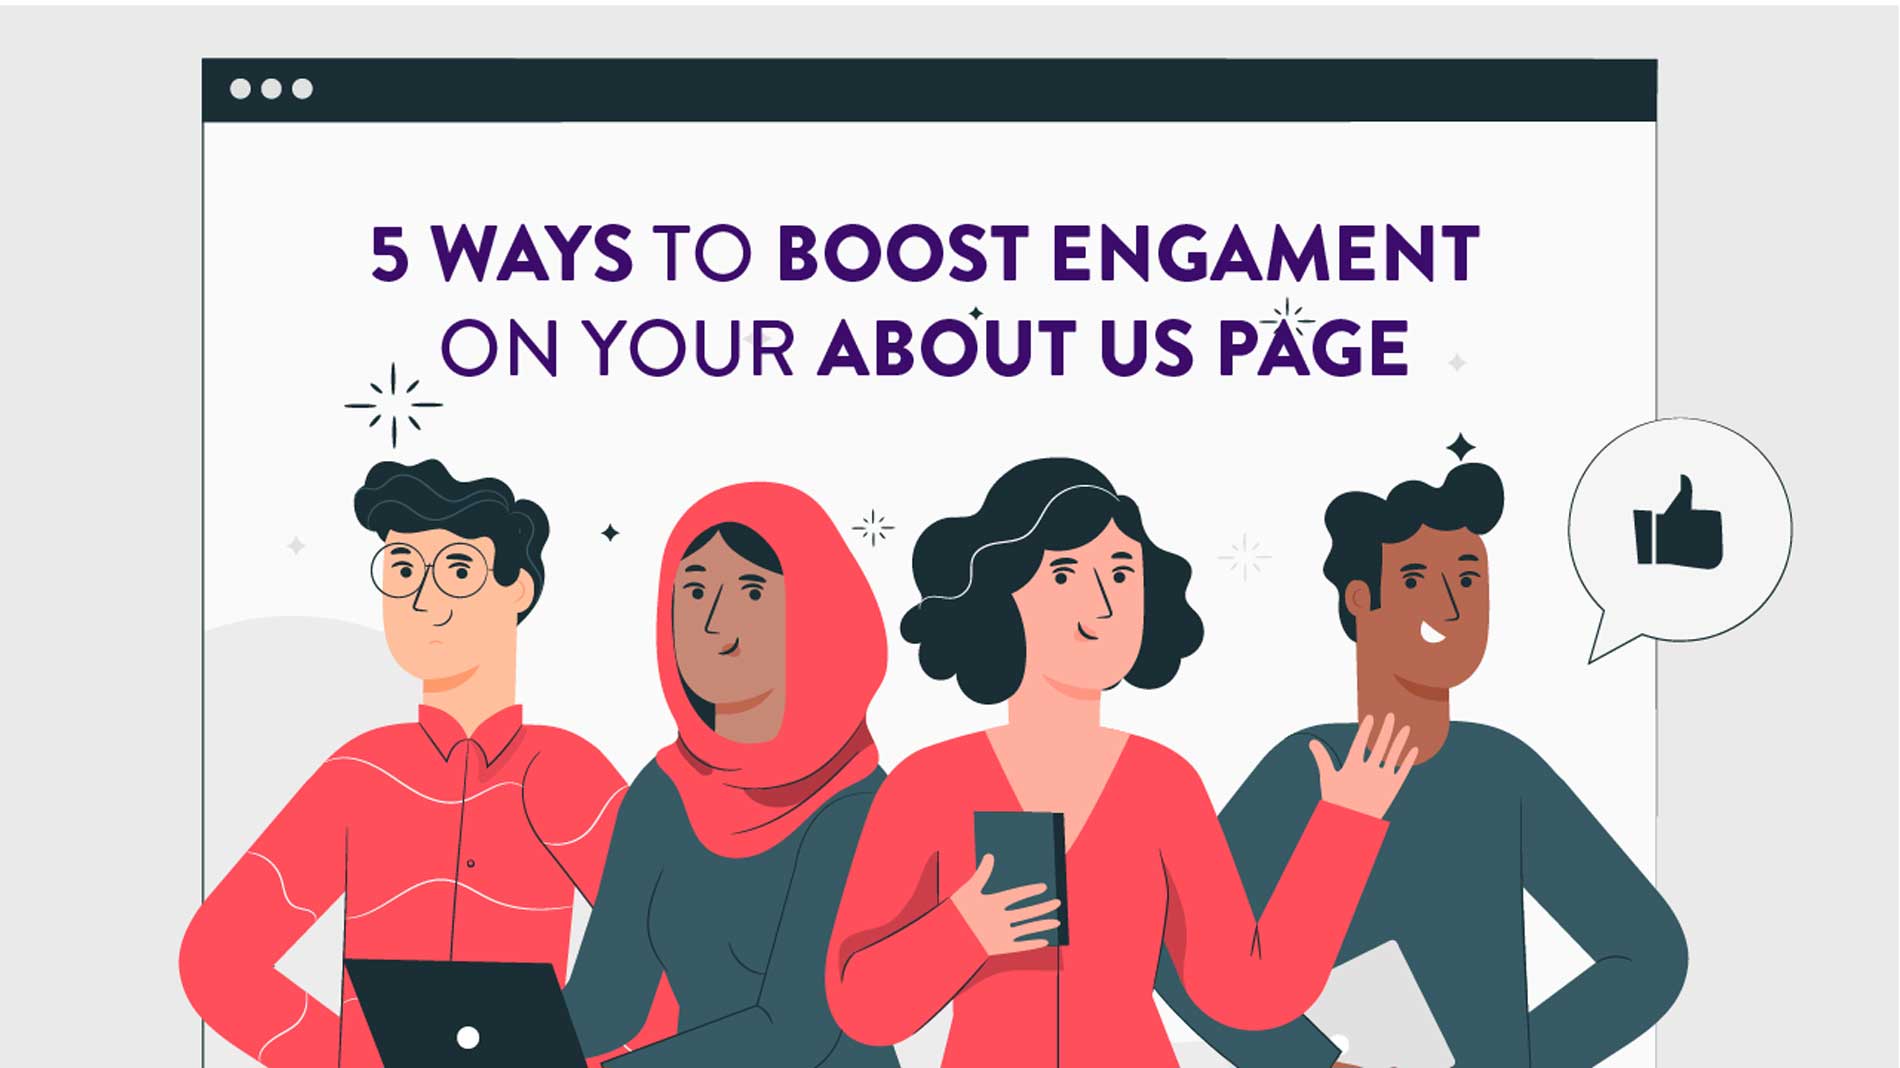 5 Ways to Boost Engagement on Your About Us Page